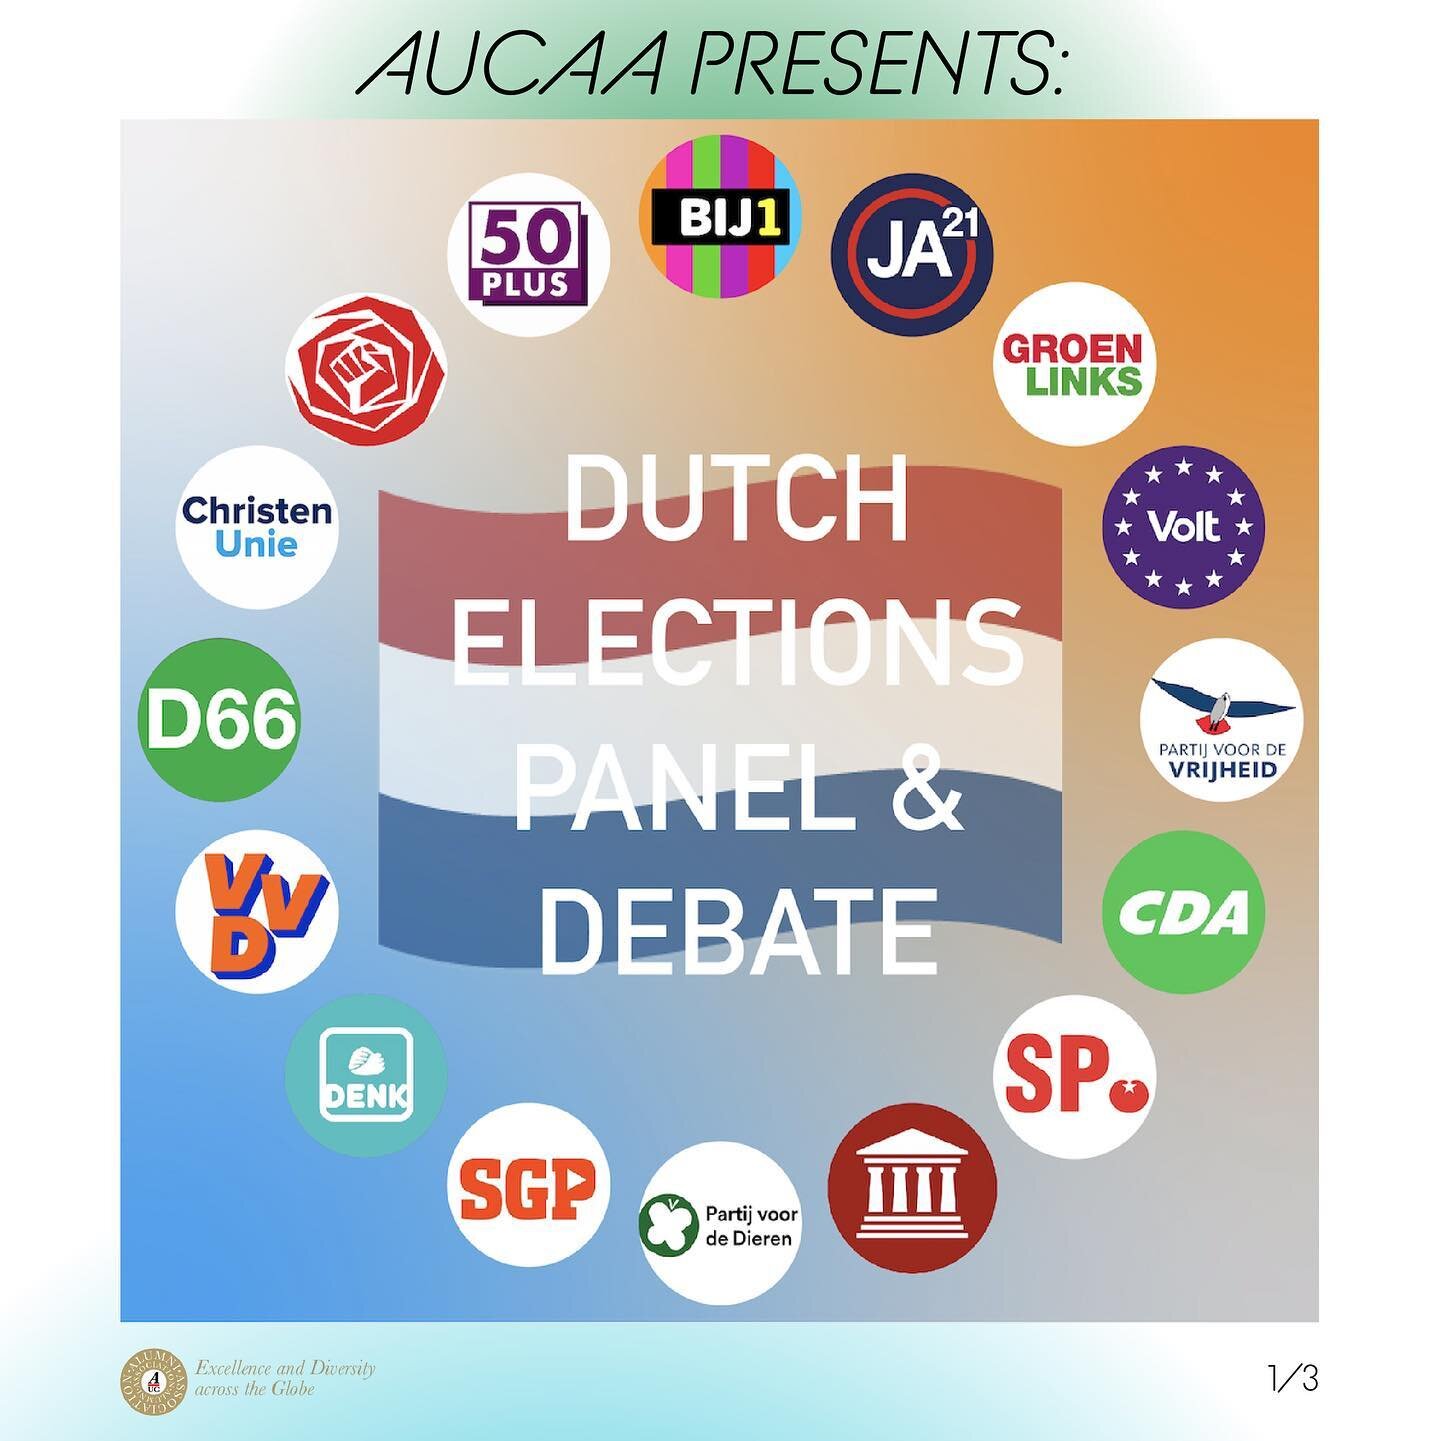 🚨New event alert!🚨

The AUCAA is BACK with yet another political deep dive!⚡️This time we discuss the upcoming Dutch parliamentary elections, important issues, new political parties and more! Our mystery panelists will be anounced very soon... 😉

